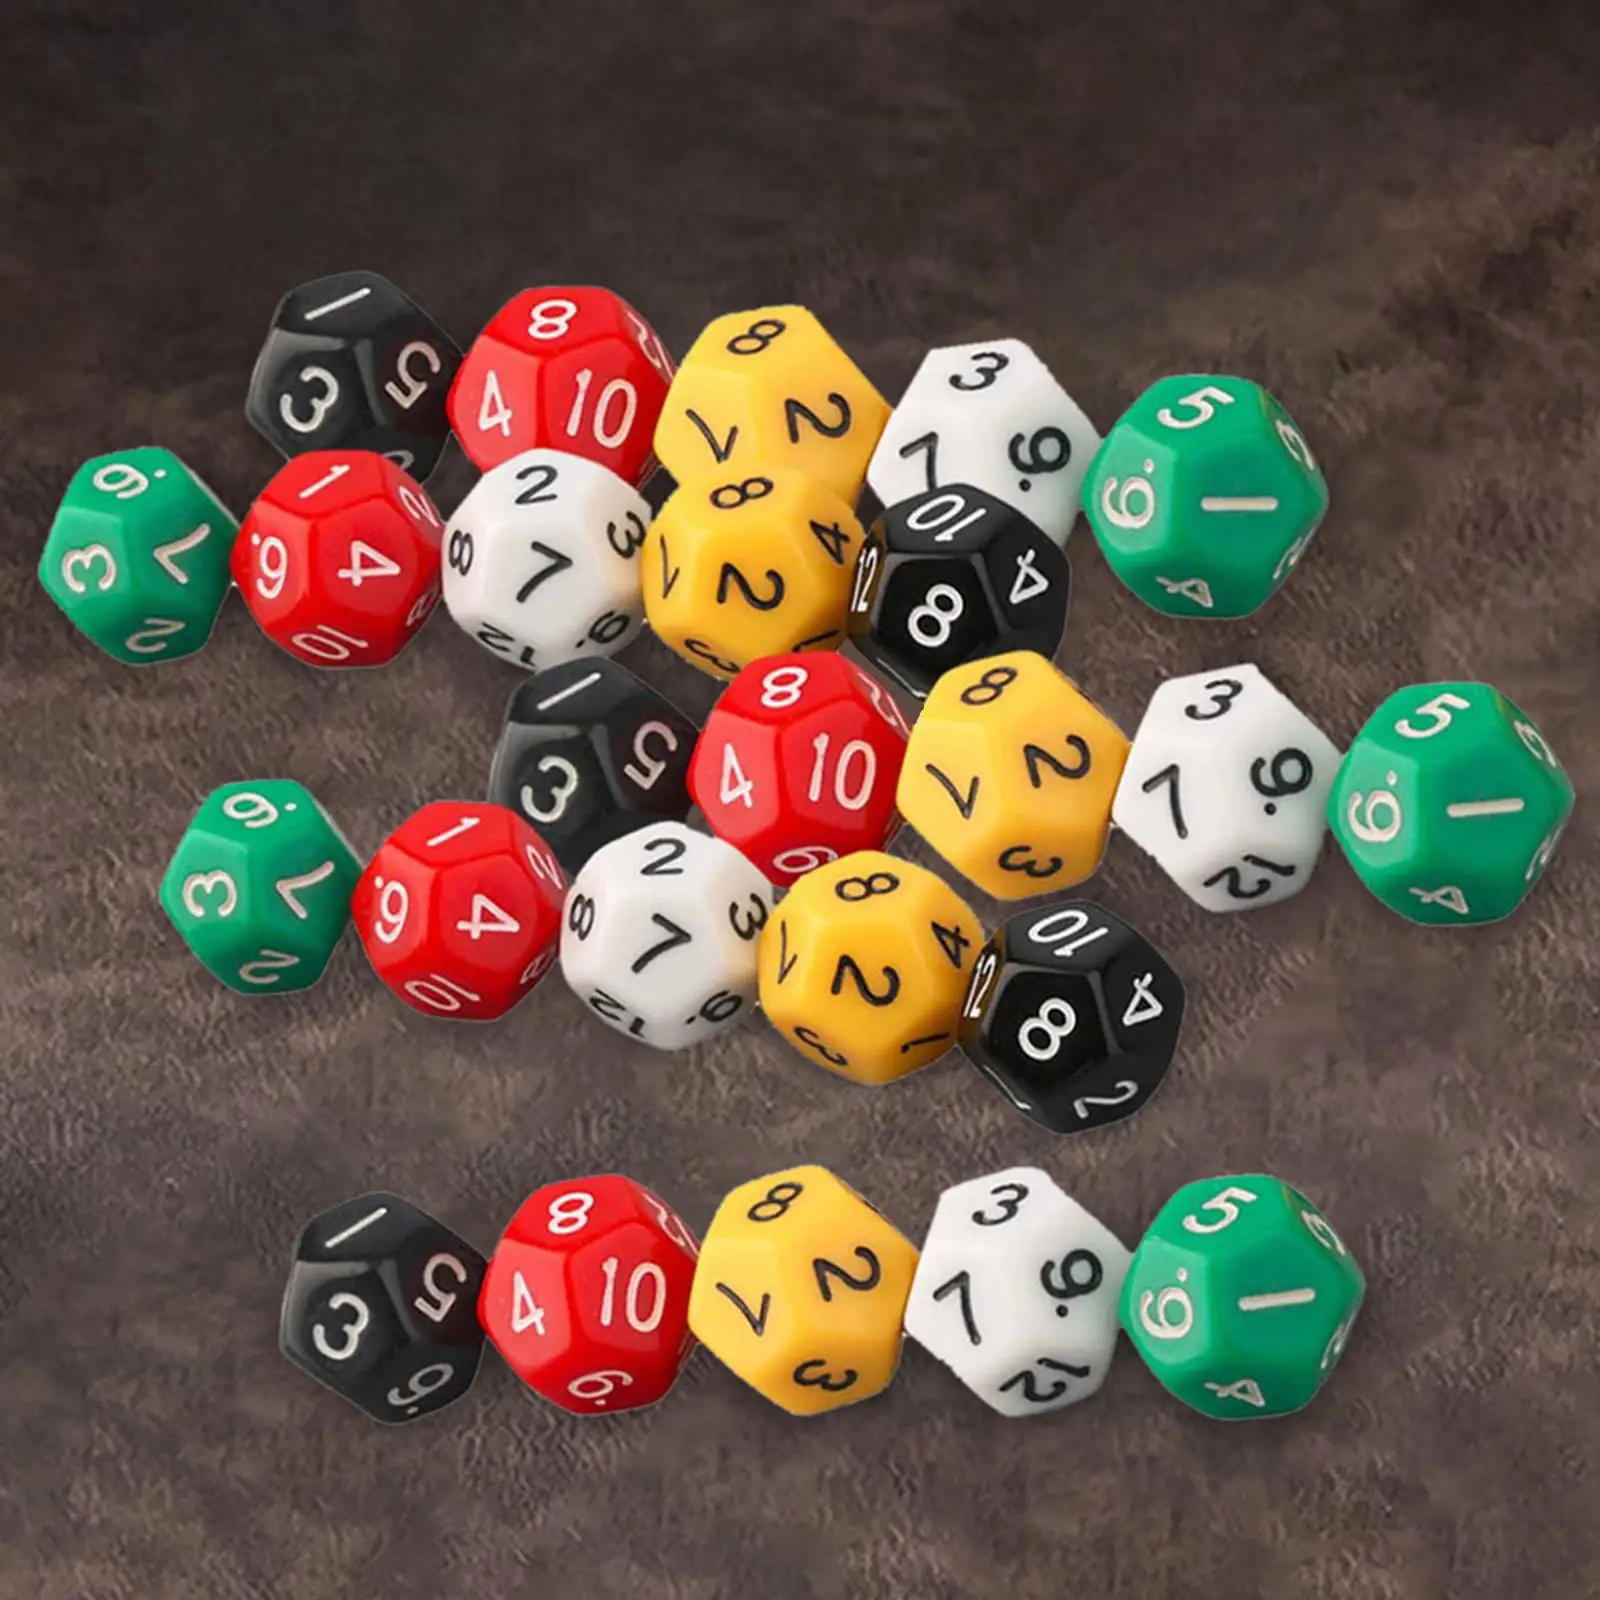 25Pcs Polyhedral Dice Gift Handmade Vintage Style Parties Toy Crafts Table Gaming Dice D12 Multisided Dice for Role Playing Game